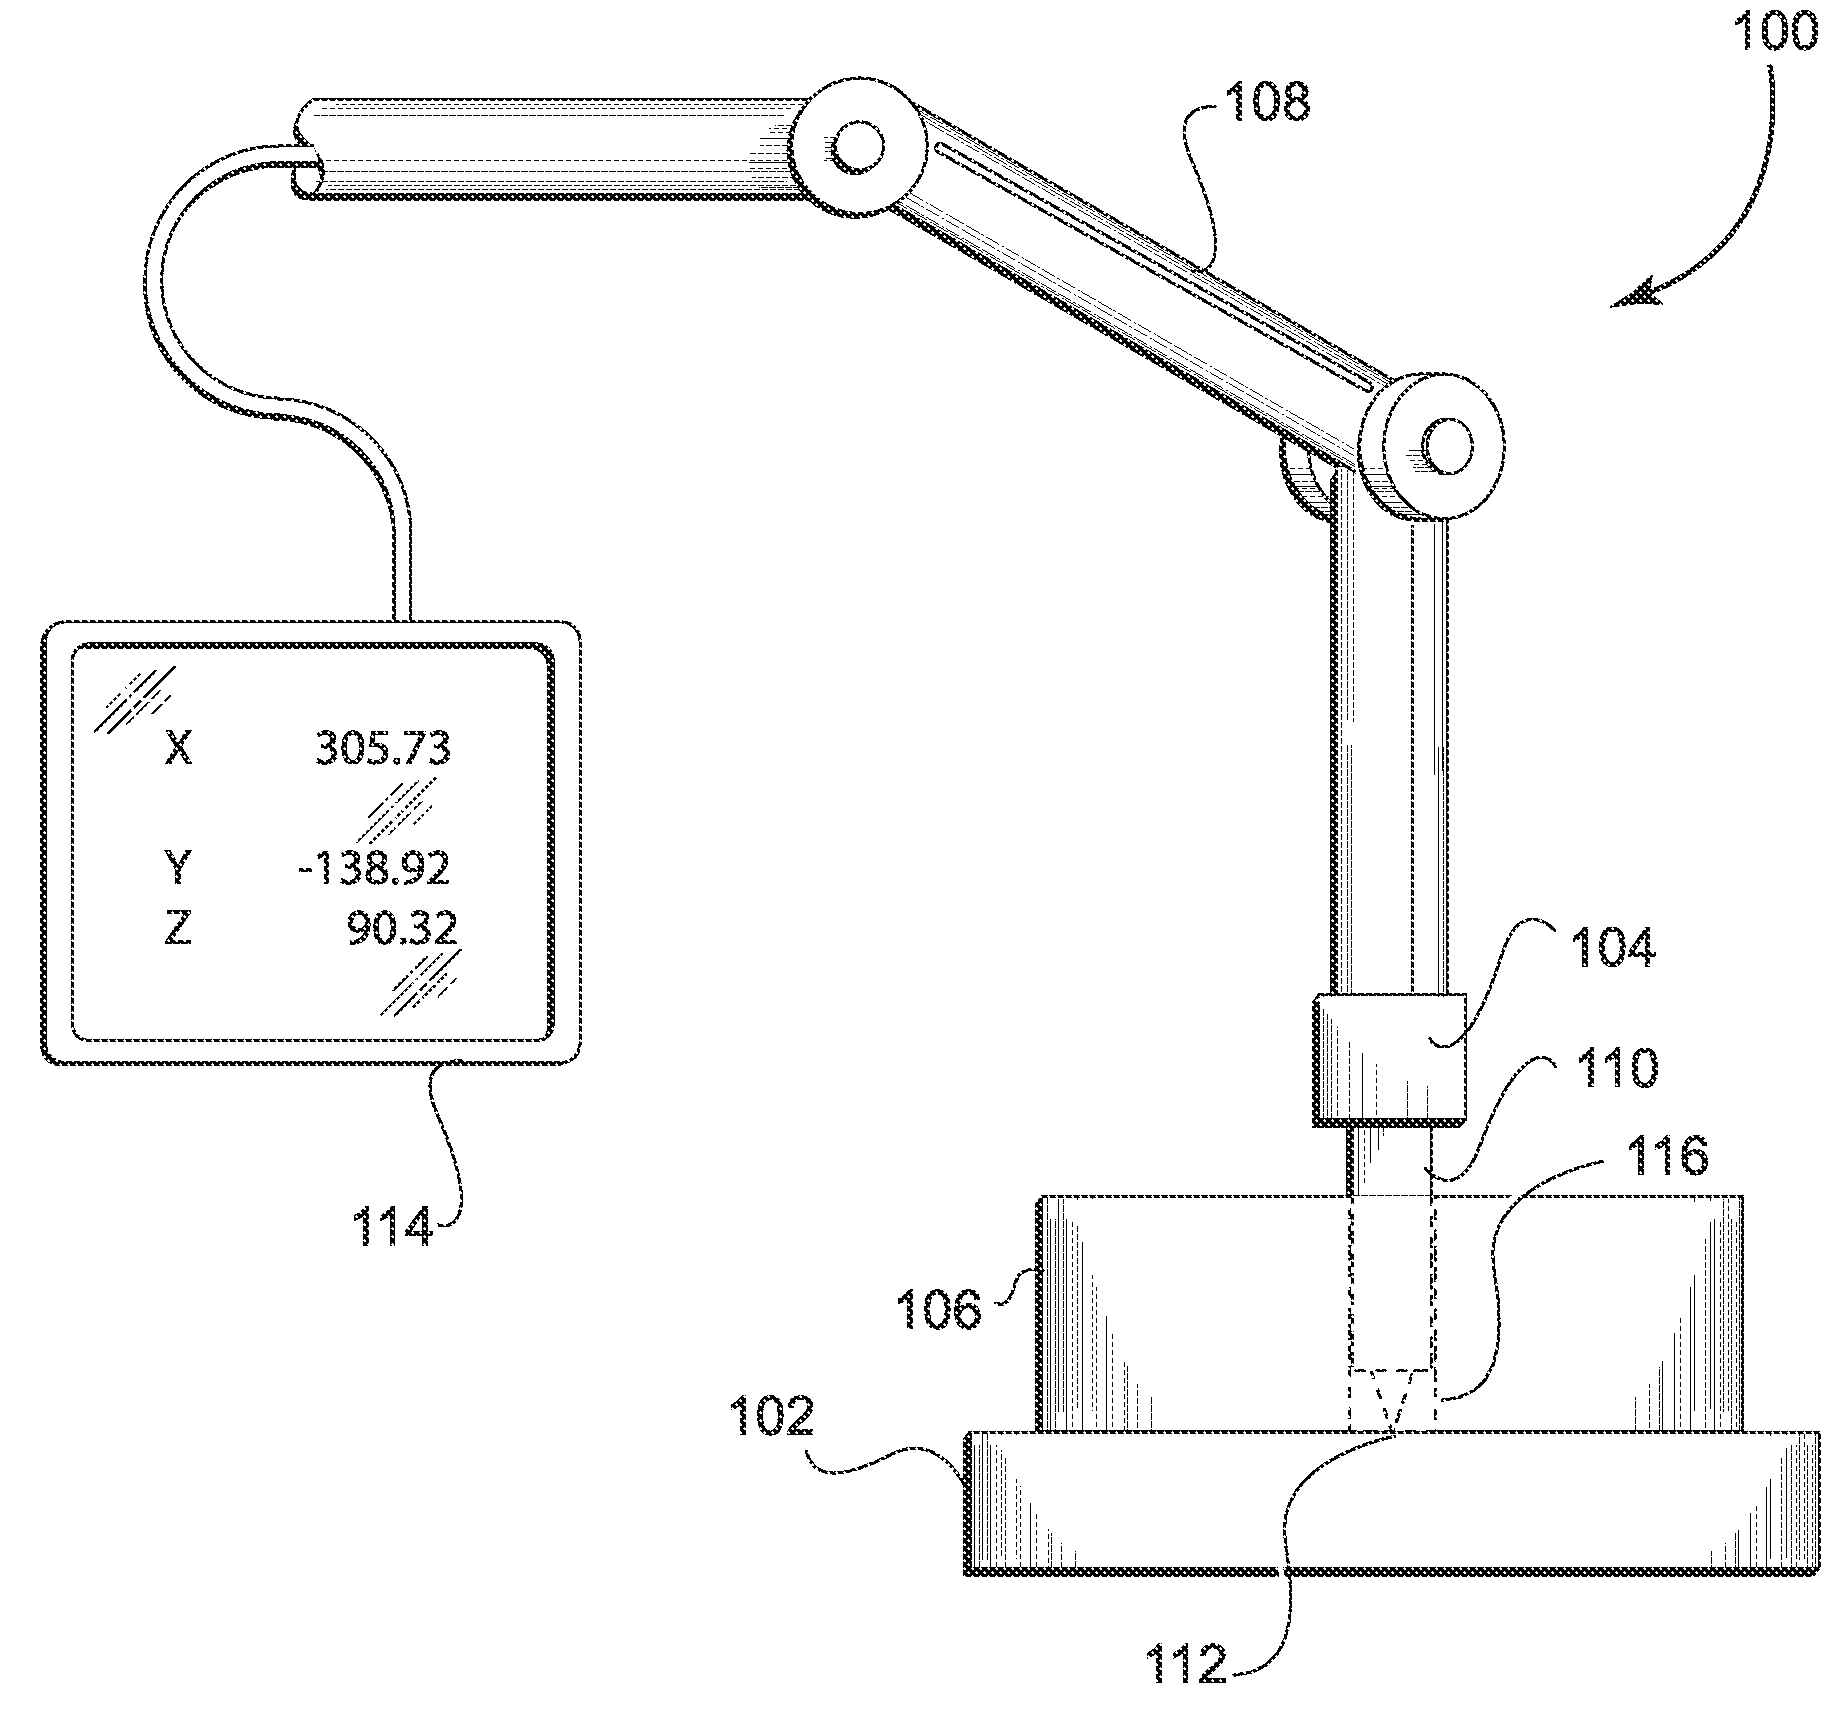 Locating and drilling determinate assembly holes using a coordinate measuring device